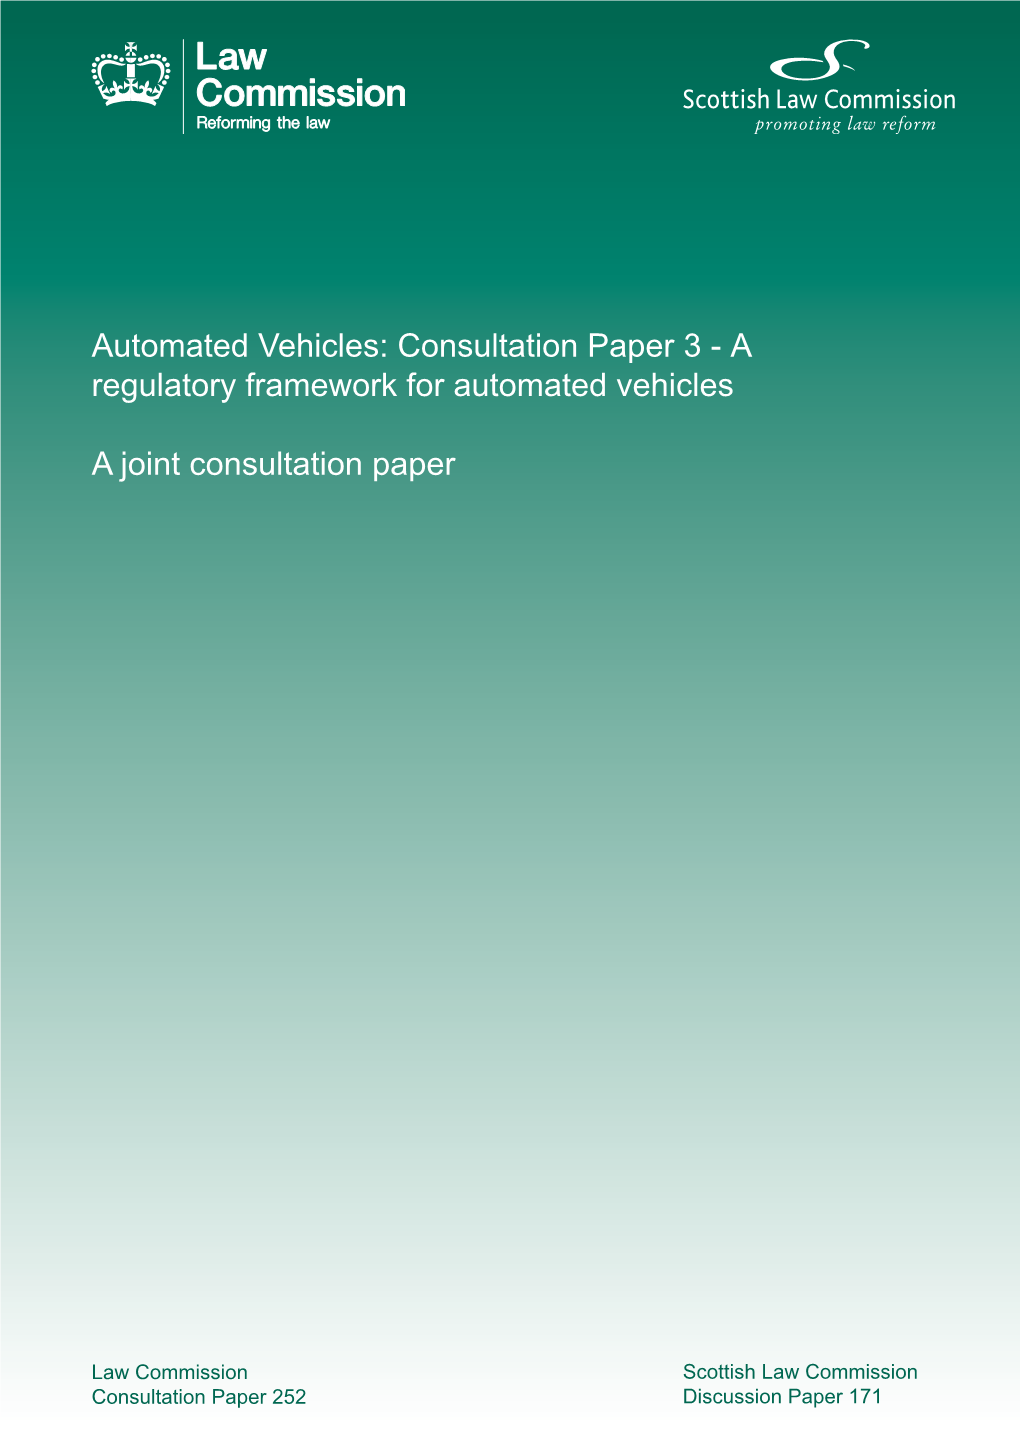 Automated Vehicles: Consultation Paper 3 - a Regulatory Framework for Automated Vehicles